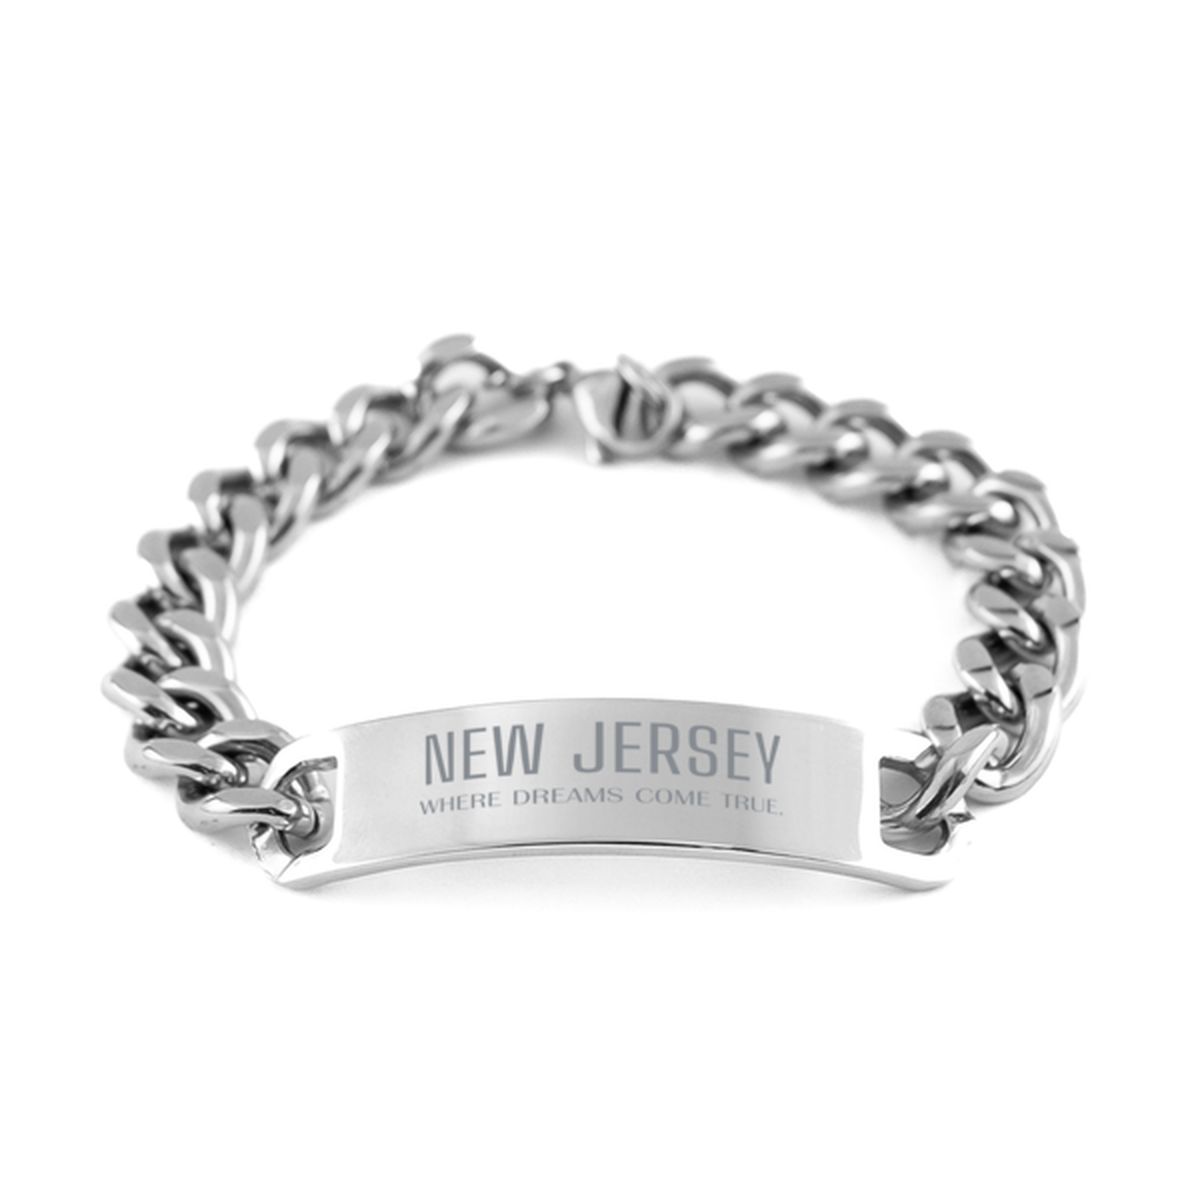 Love New Jersey State Cuban Chain Stainless Steel Bracelet, New Jersey Where dreams come true, Birthday Inspirational Gifts For New Jersey Men, Women, Friends